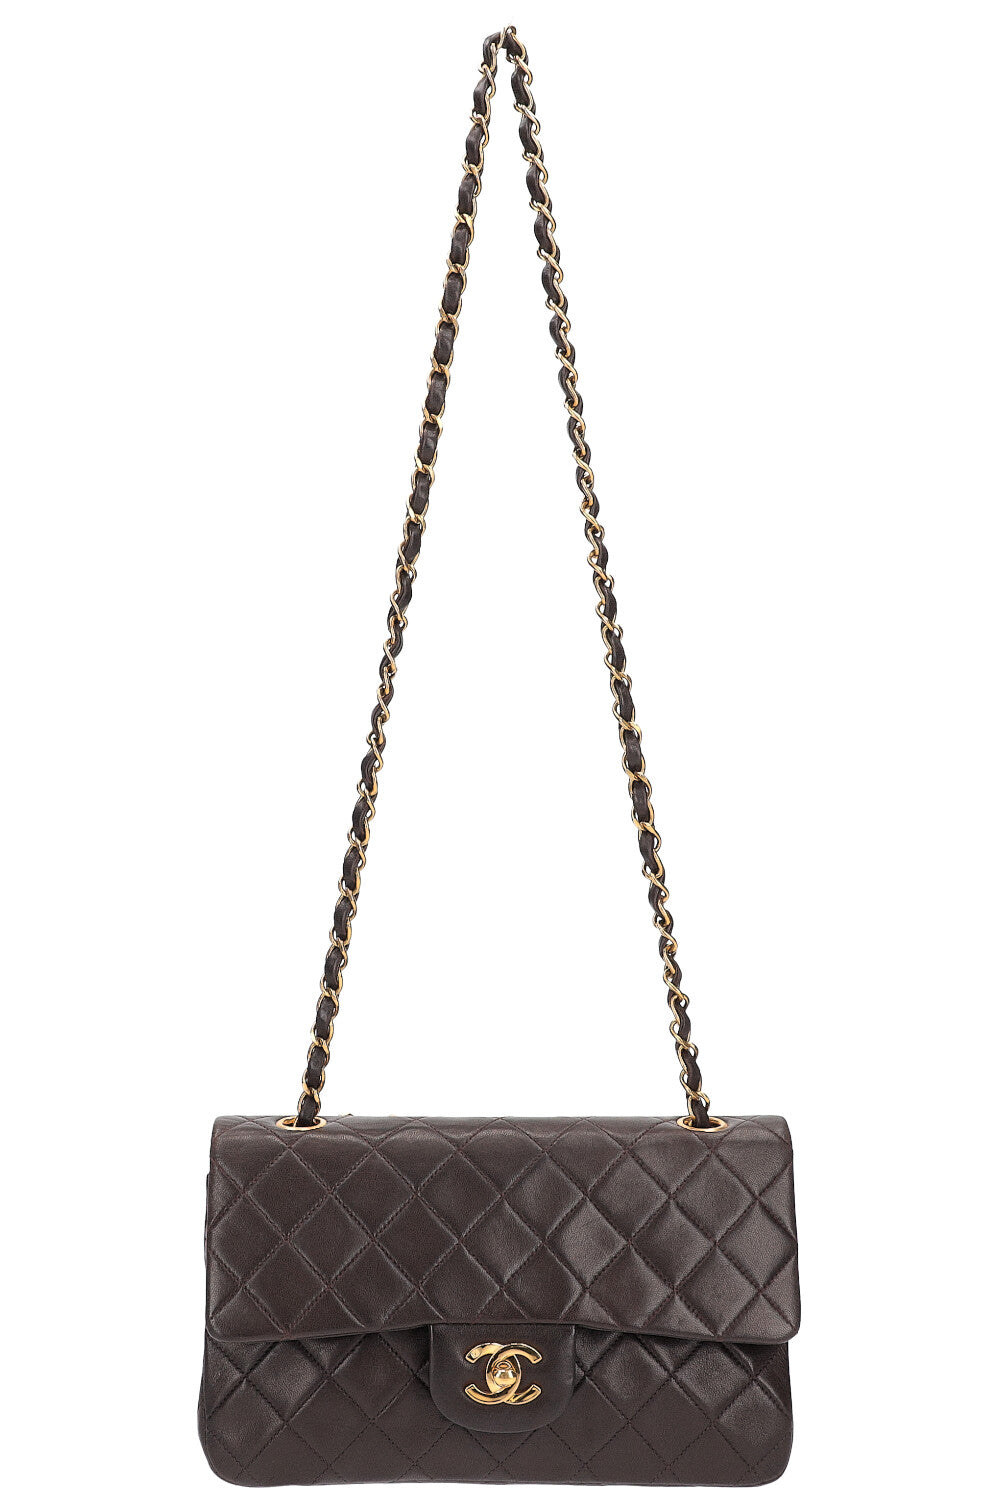 Timeless/classique leather crossbody bag Chanel Brown in Leather - 40736019